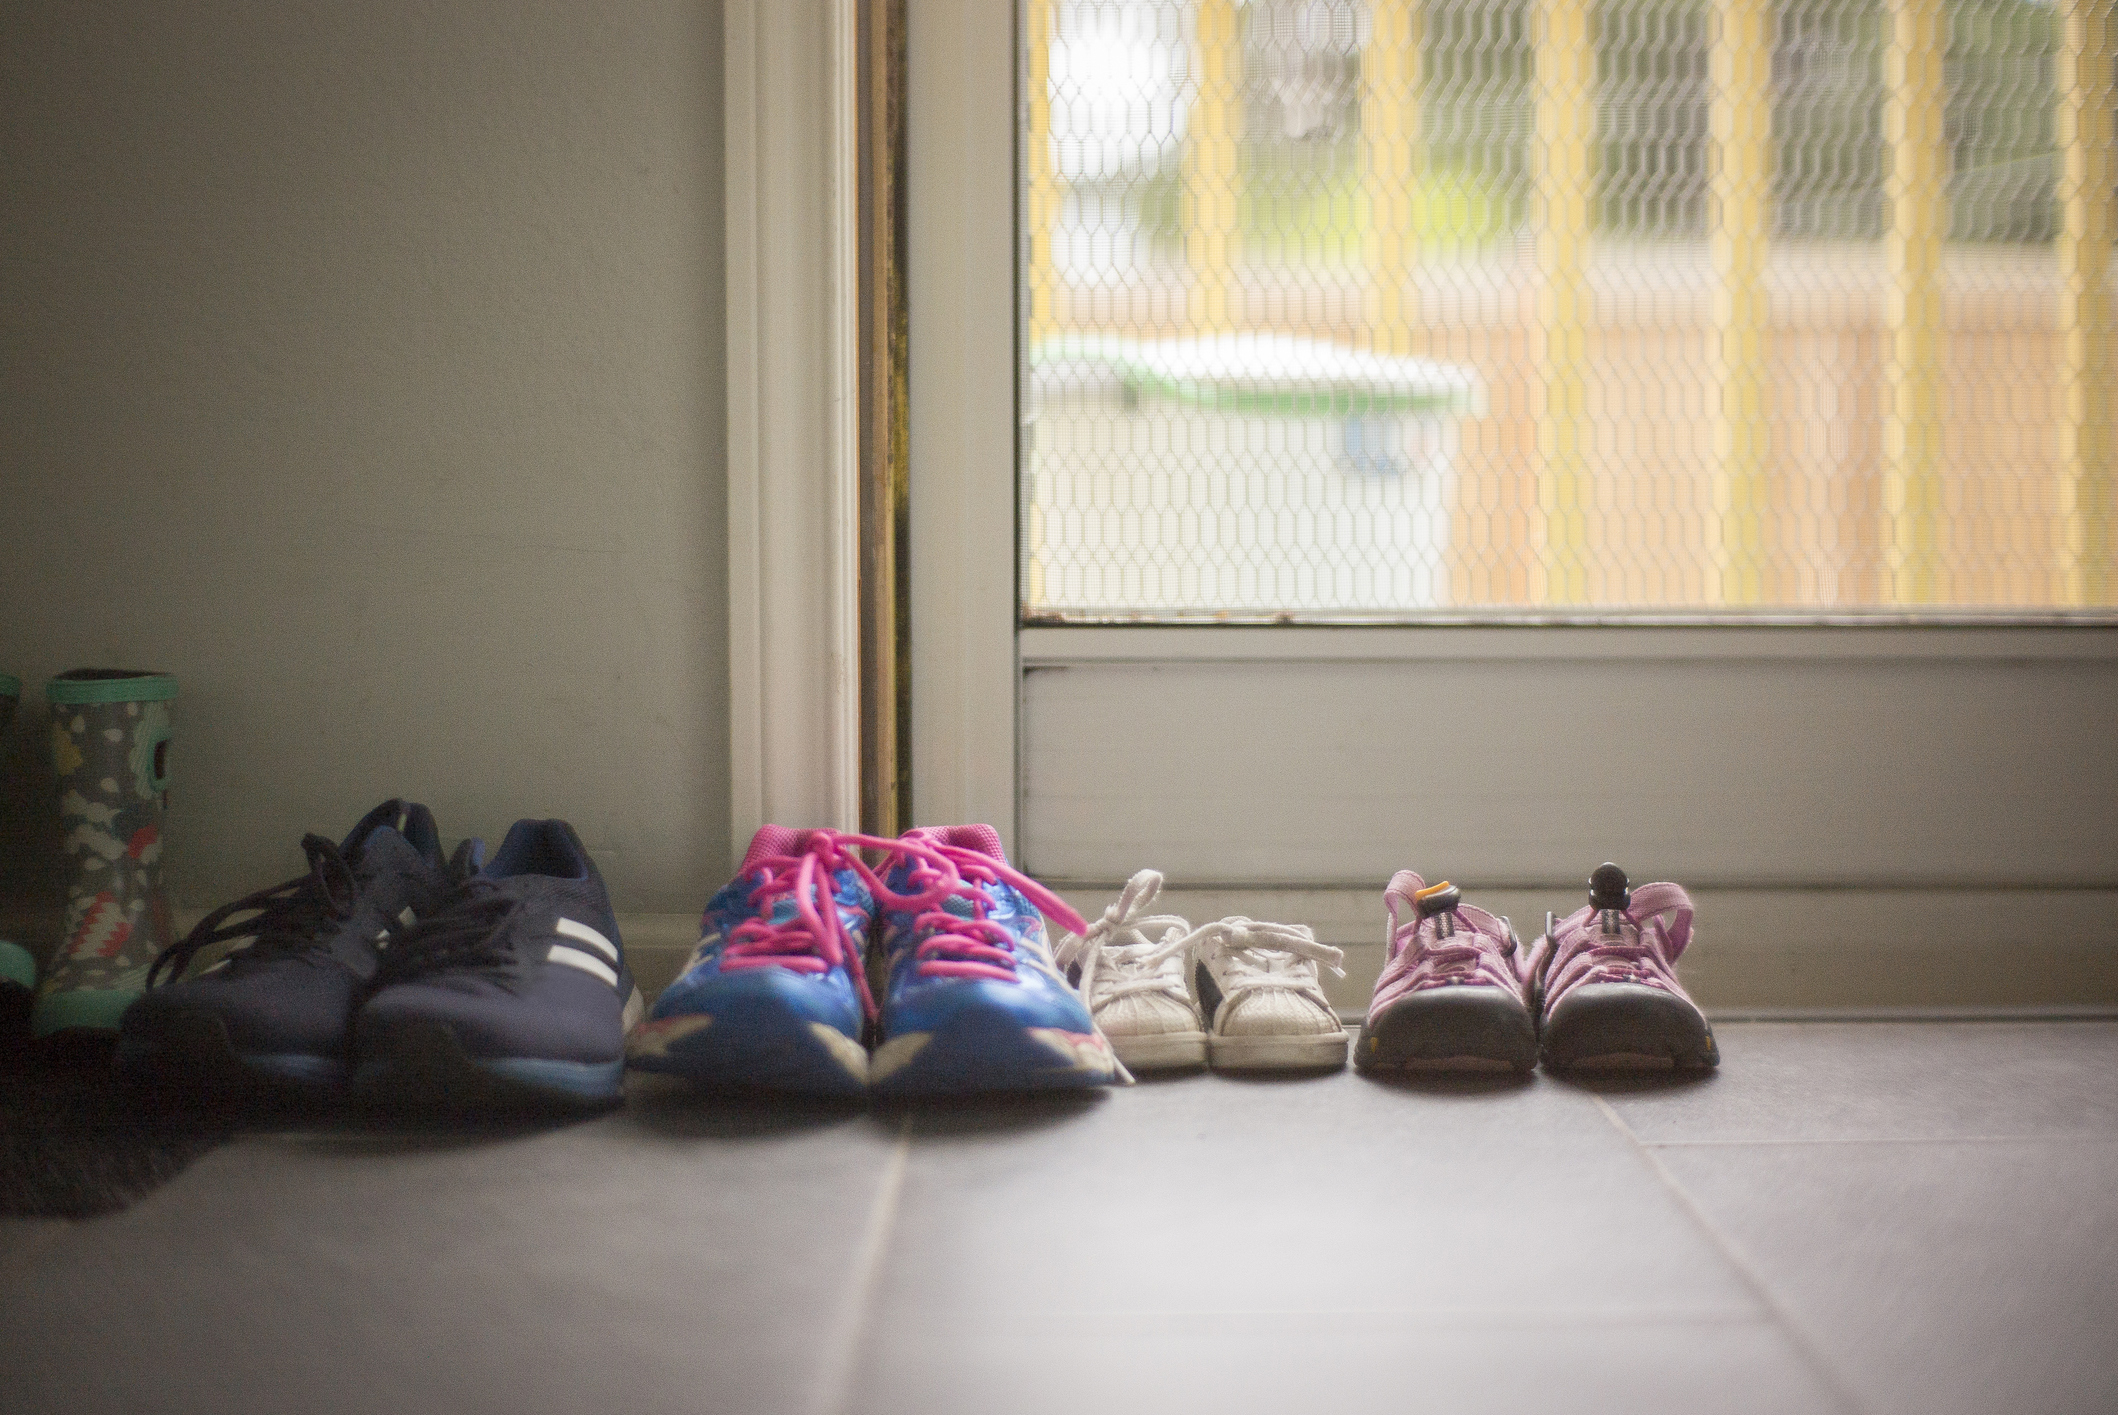 Four pairs of shoes by a door, including adult sneakers, child&#x27;s shoes, reflecting a family&#x27;s daily life